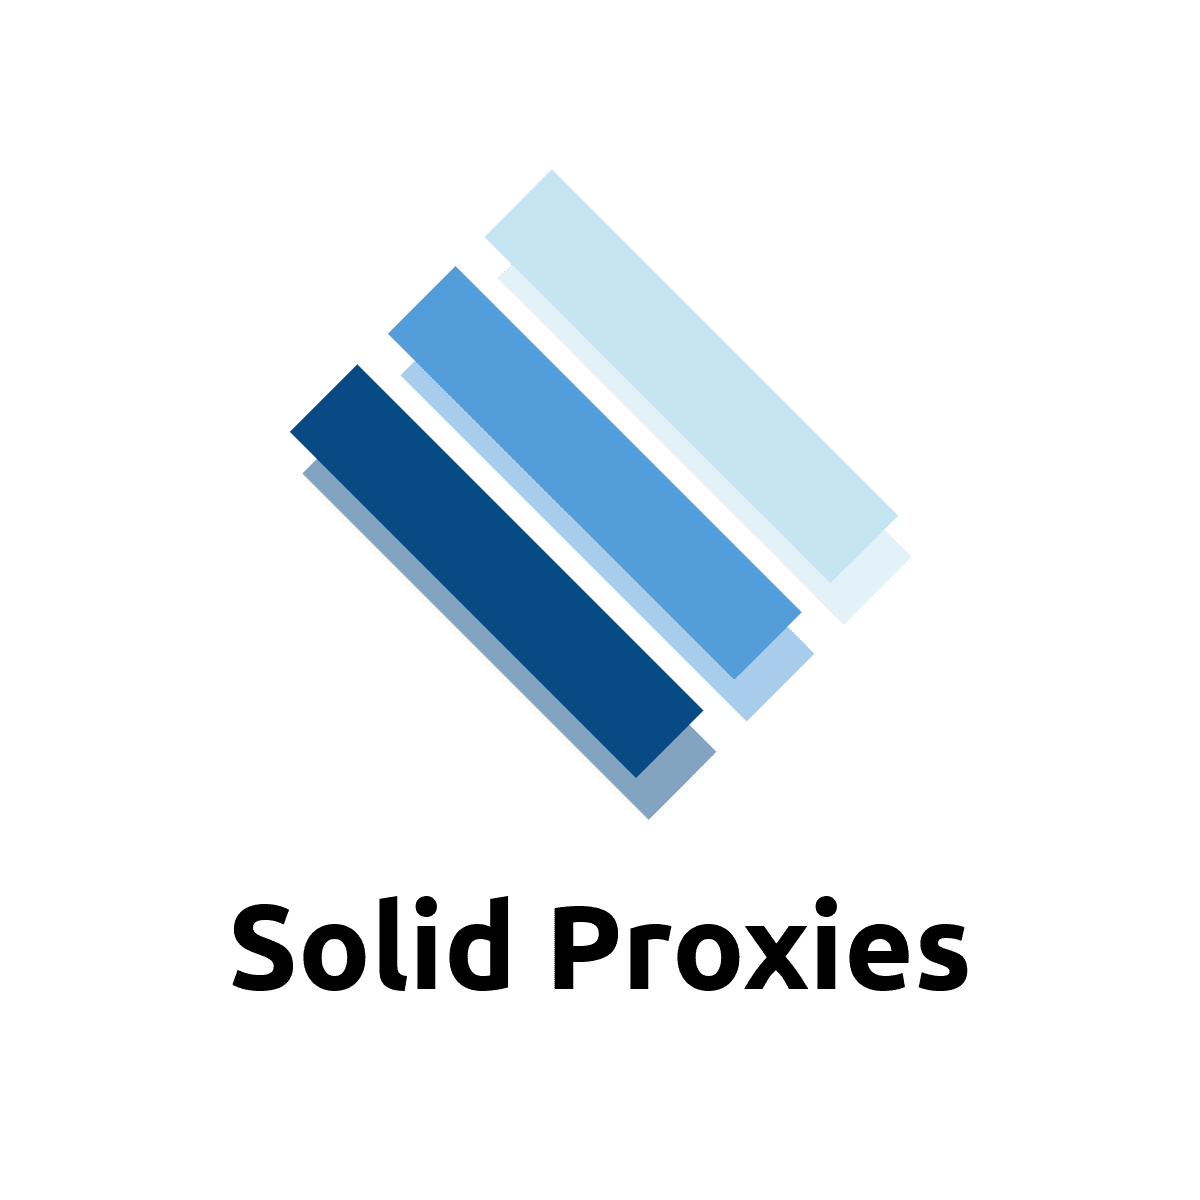 Solid Proxies logo